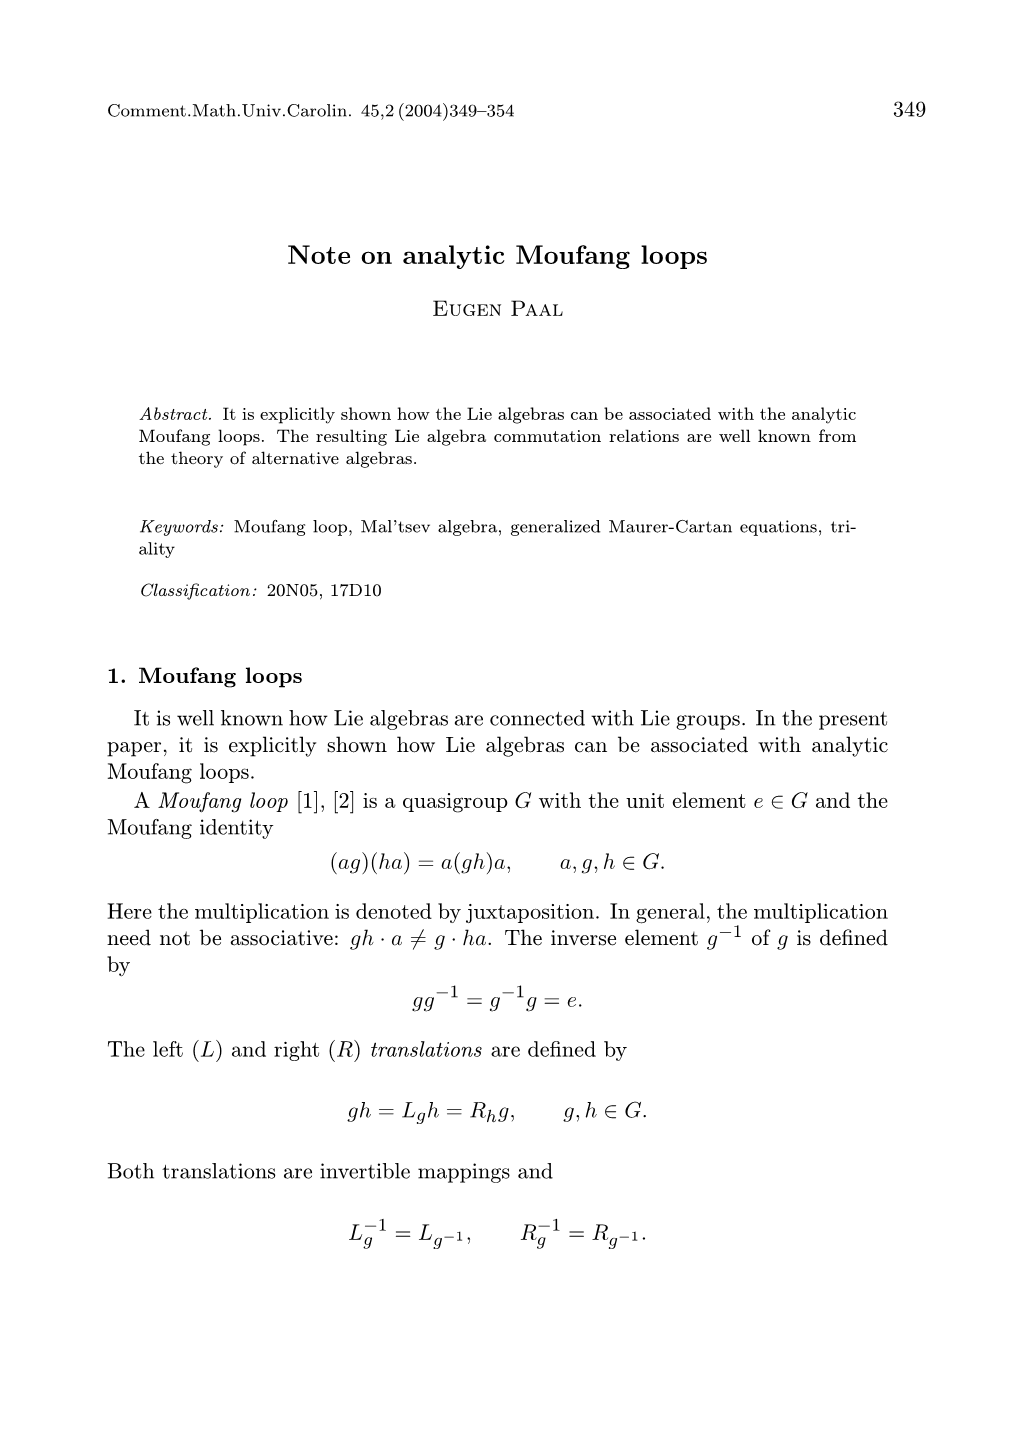 Note on Analytic Moufang Loops